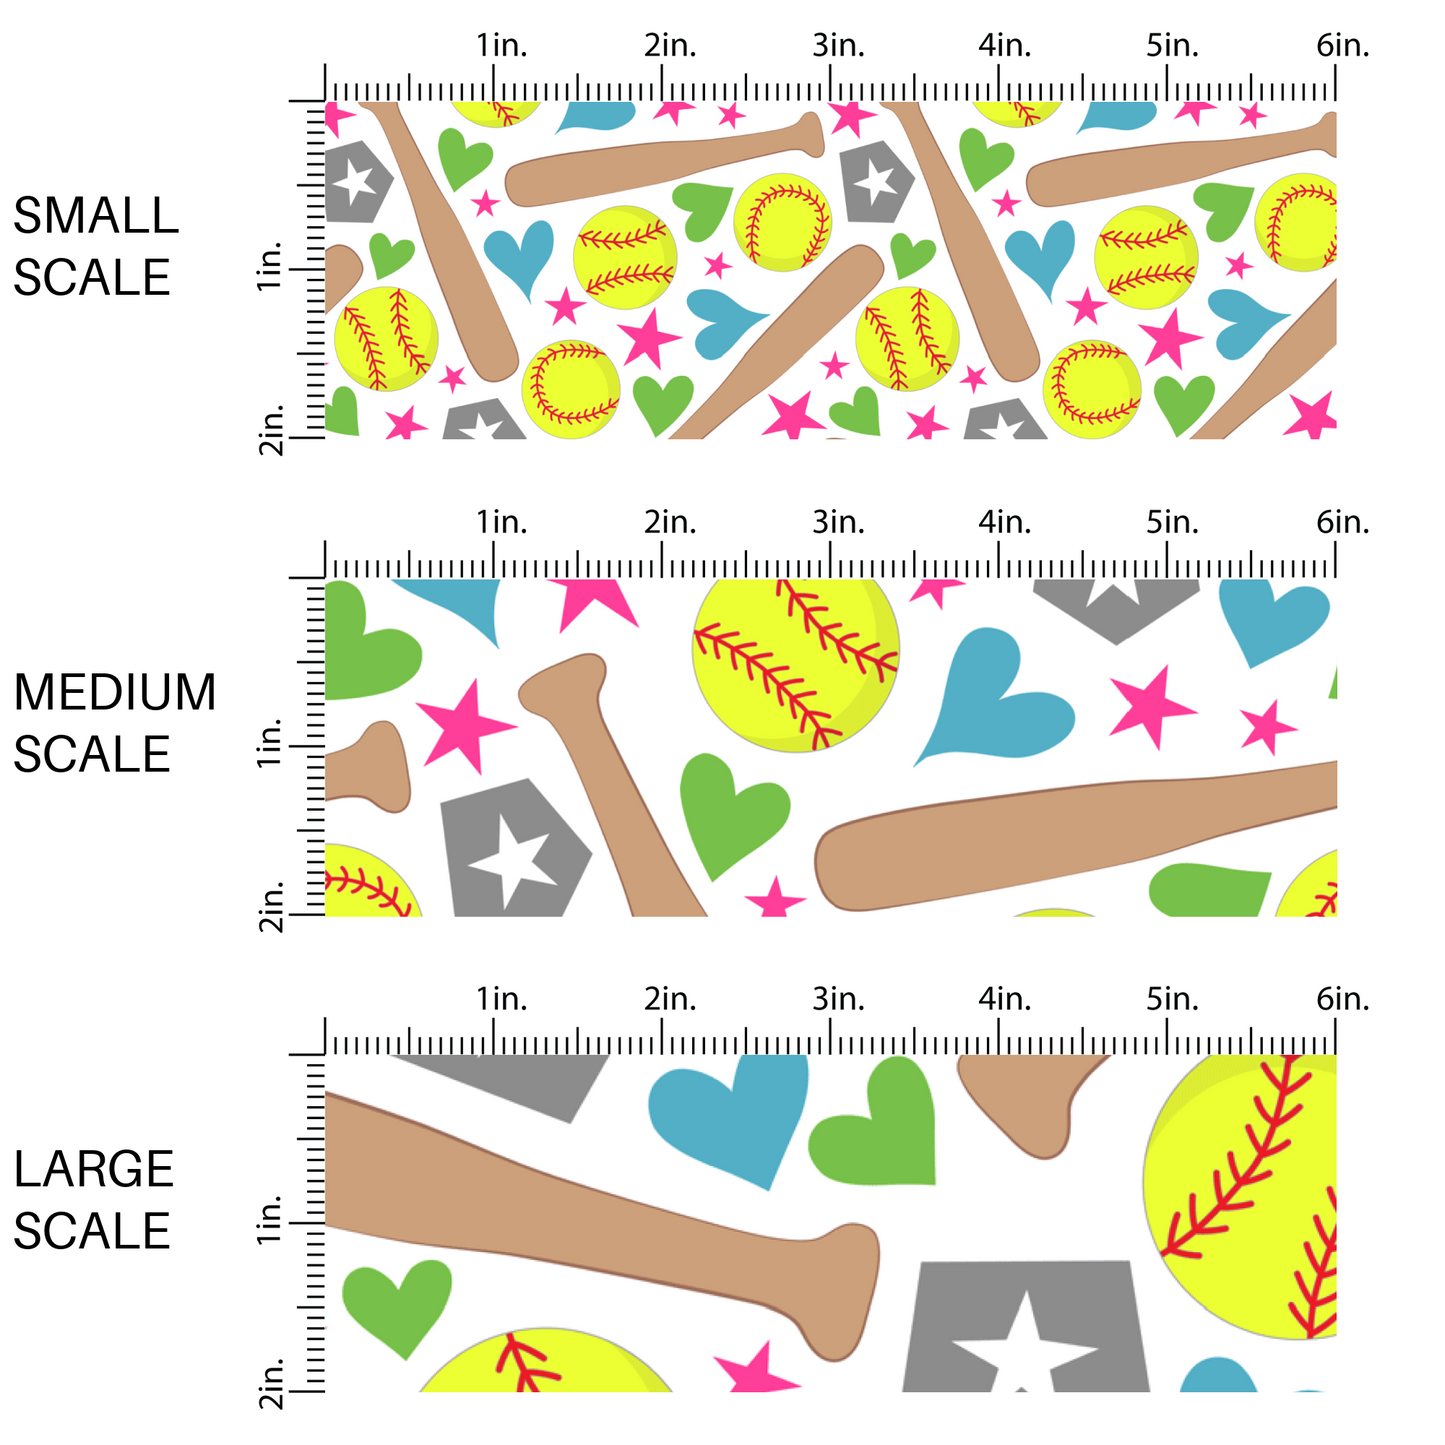 White fabric by the yard scaled image guide with yellow softballs, softball bats, home plates, hearts, and stars.